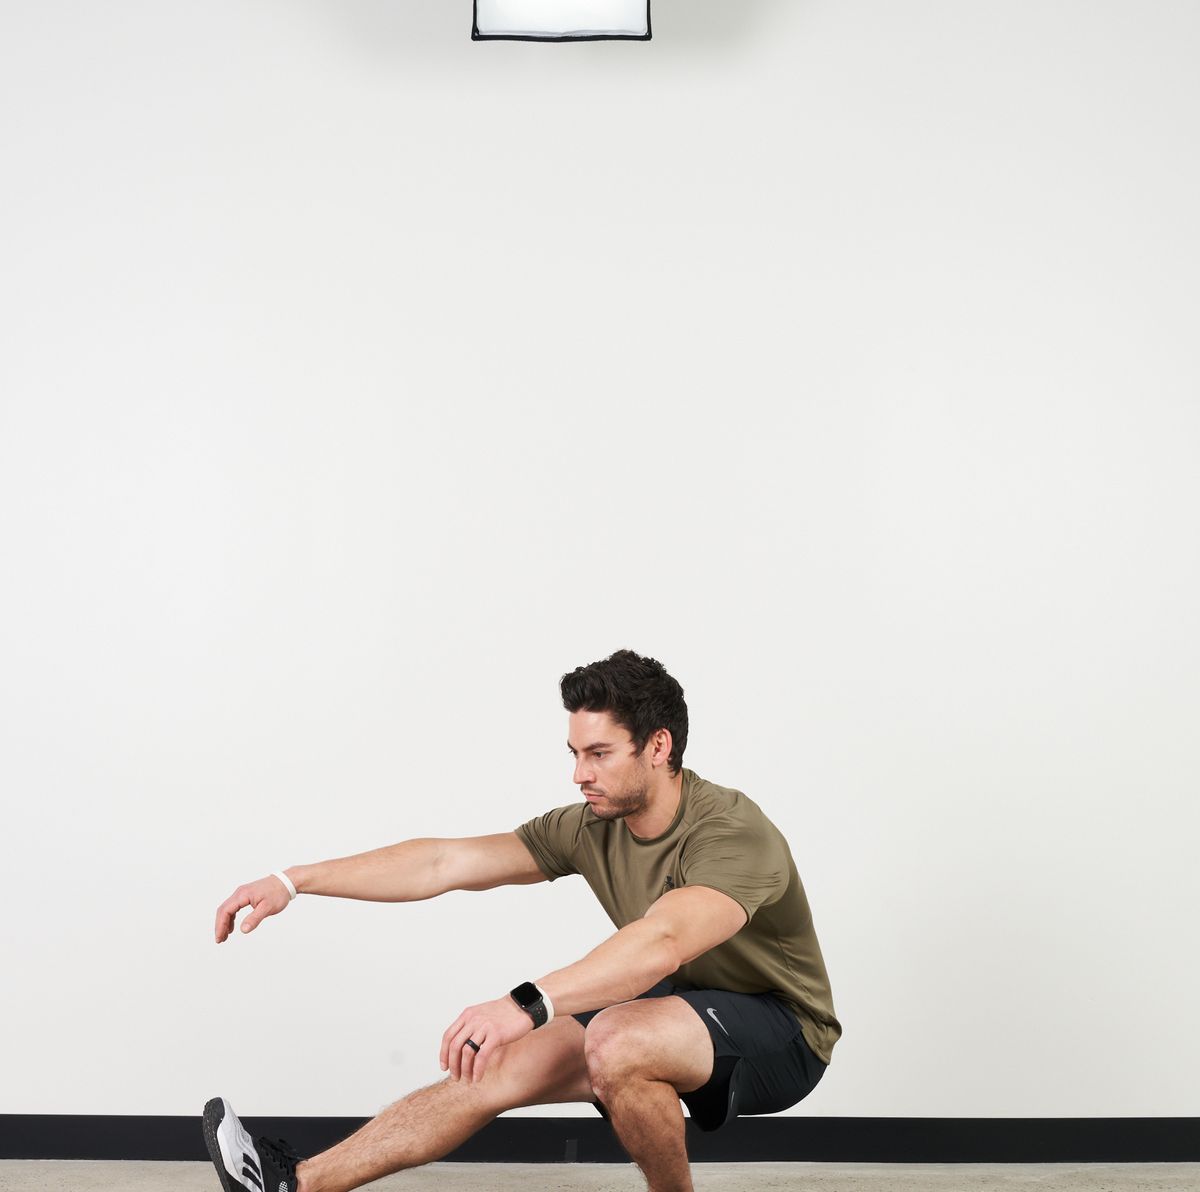 Pistol Squat: How to Do It, Form Corrections, and Variations